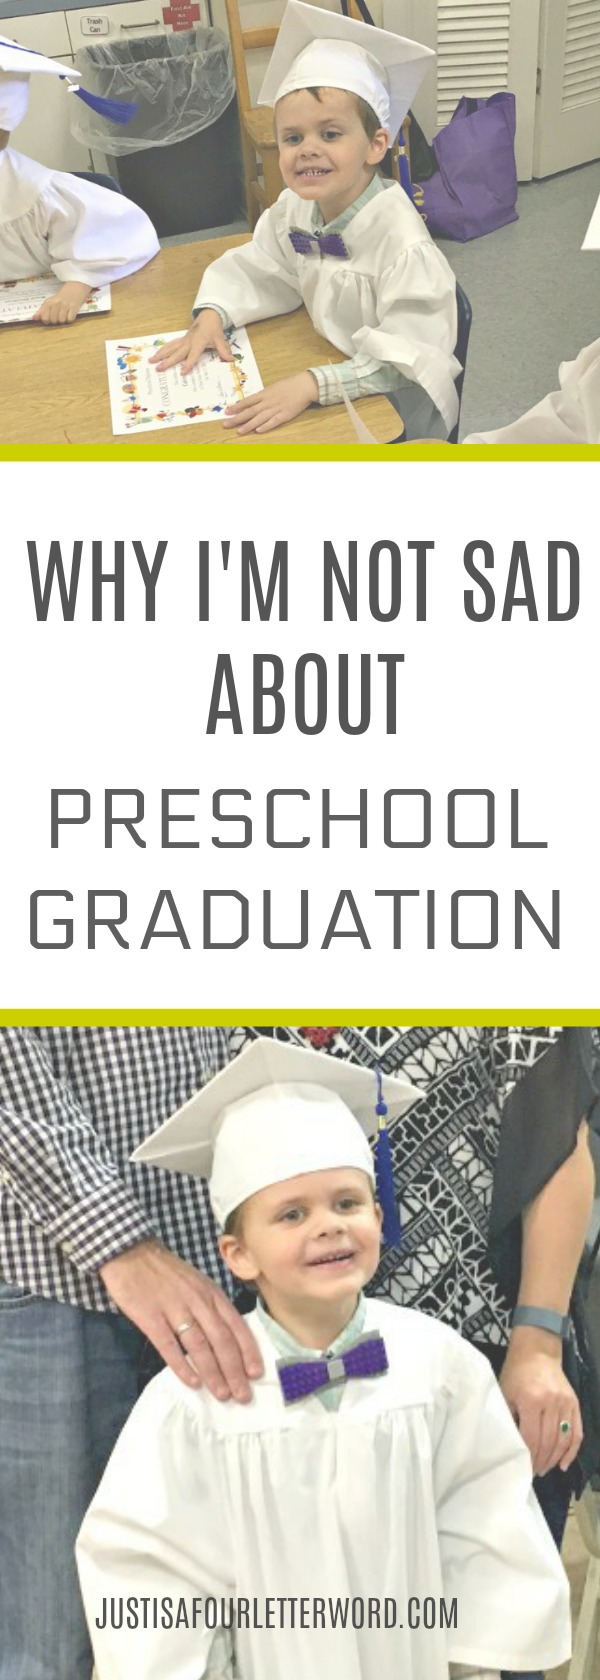 I'm not sad about preschool graduation this time. It can bring many emotions about the past, present and future lives of our little ones. But I'm ready. Are you ready for the next step or a little sad?